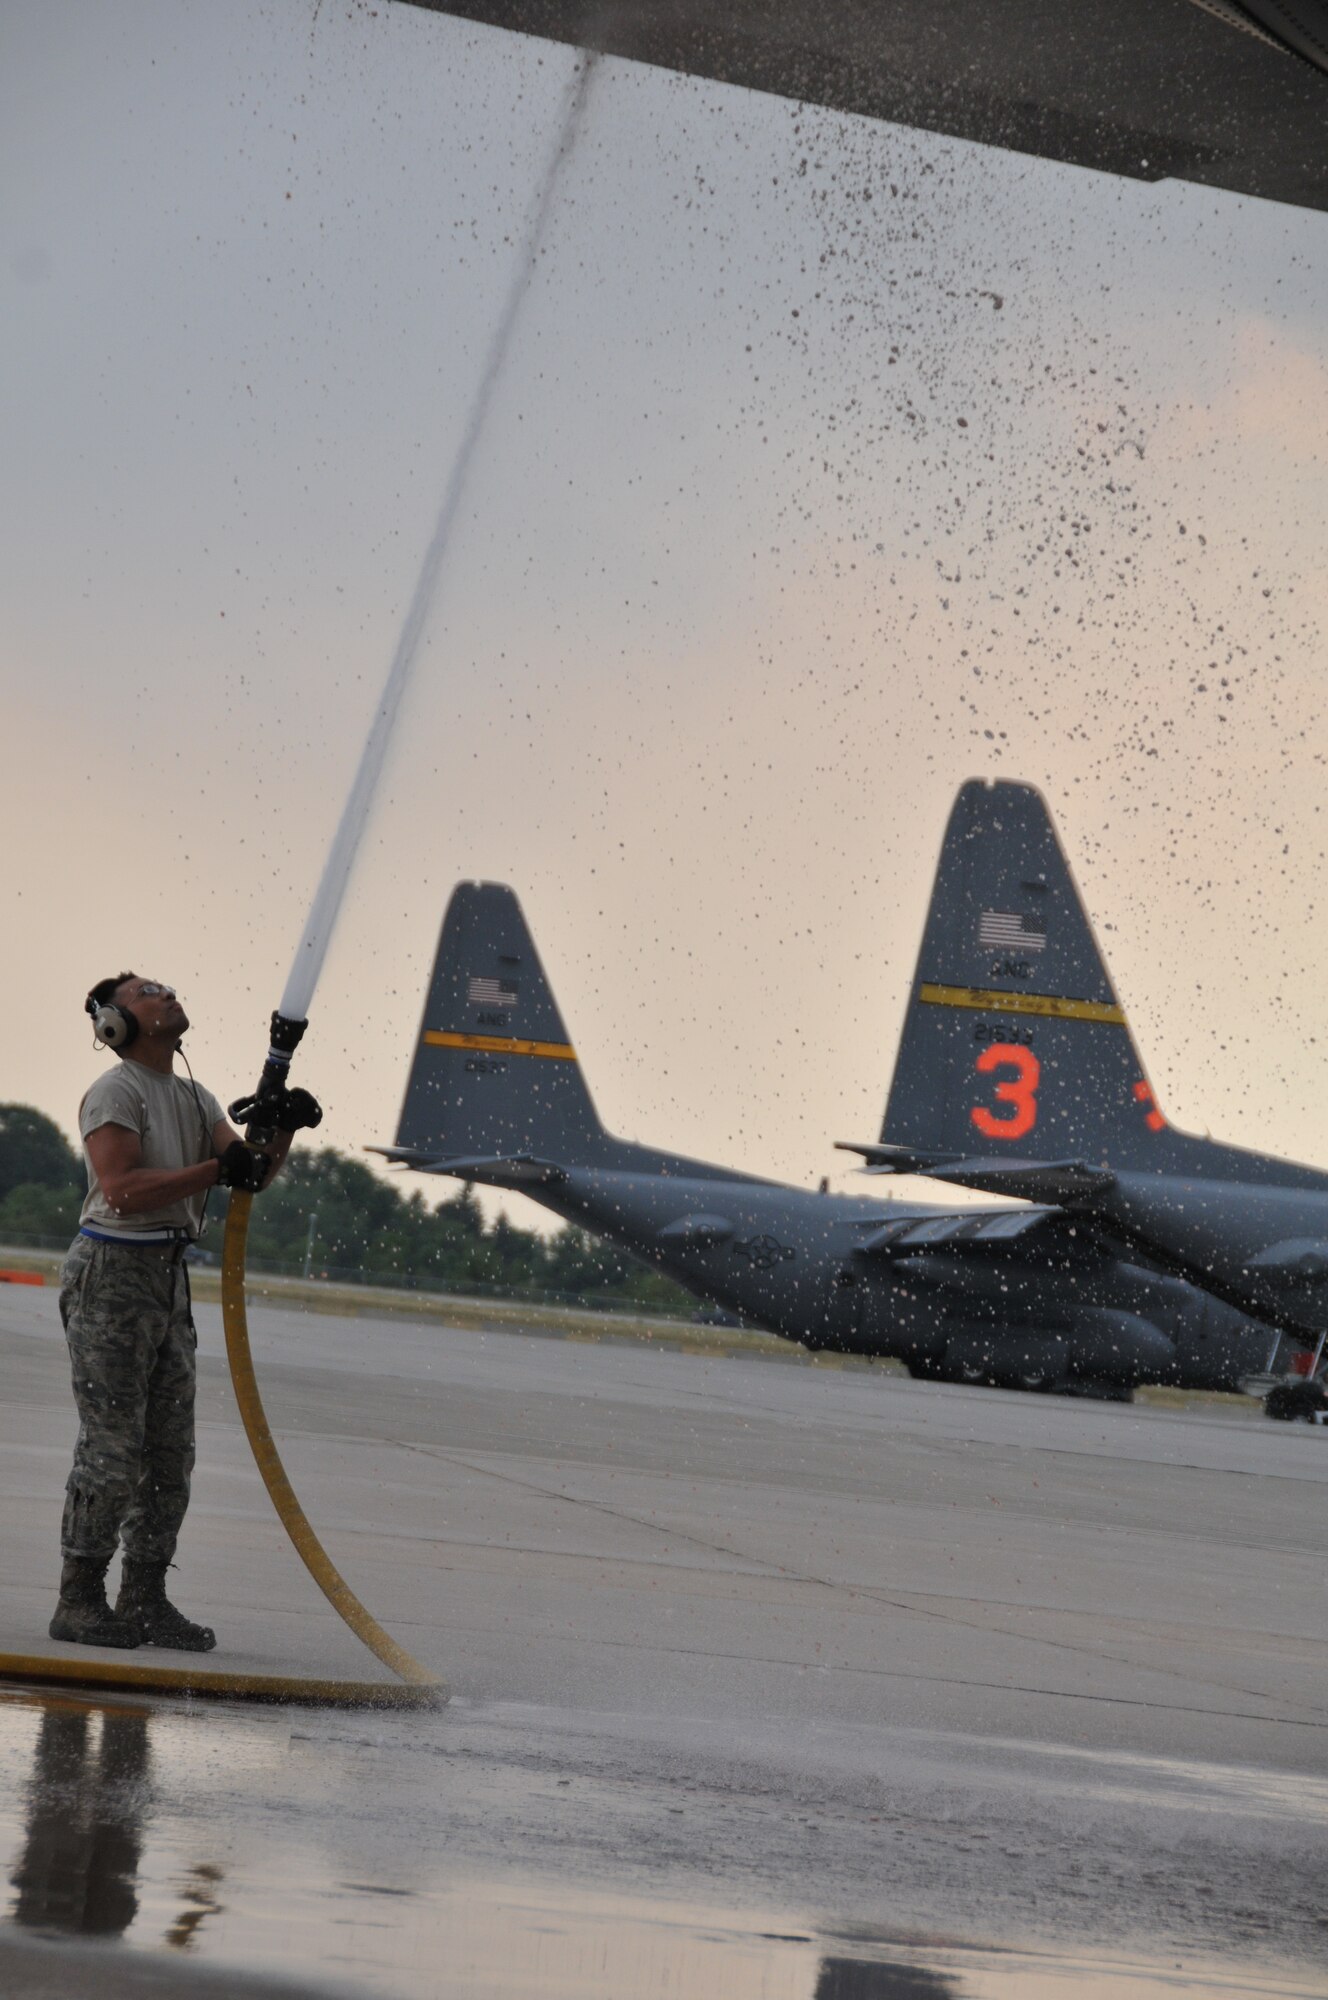 Staff Sgt. Efren Enriquez, 30th Airlift Squadron propulsion craftsman, sprays the tail of a MAFFS-equipped C-130 on the flightline in Cheyenne, Wyo., July 3, 2012. MAFFS aircraft continue to operate in the Rocky Mountain region to assist with firefighting efforts. (U.S. Air Force photo by 1st Lt. Rusty Ridley)